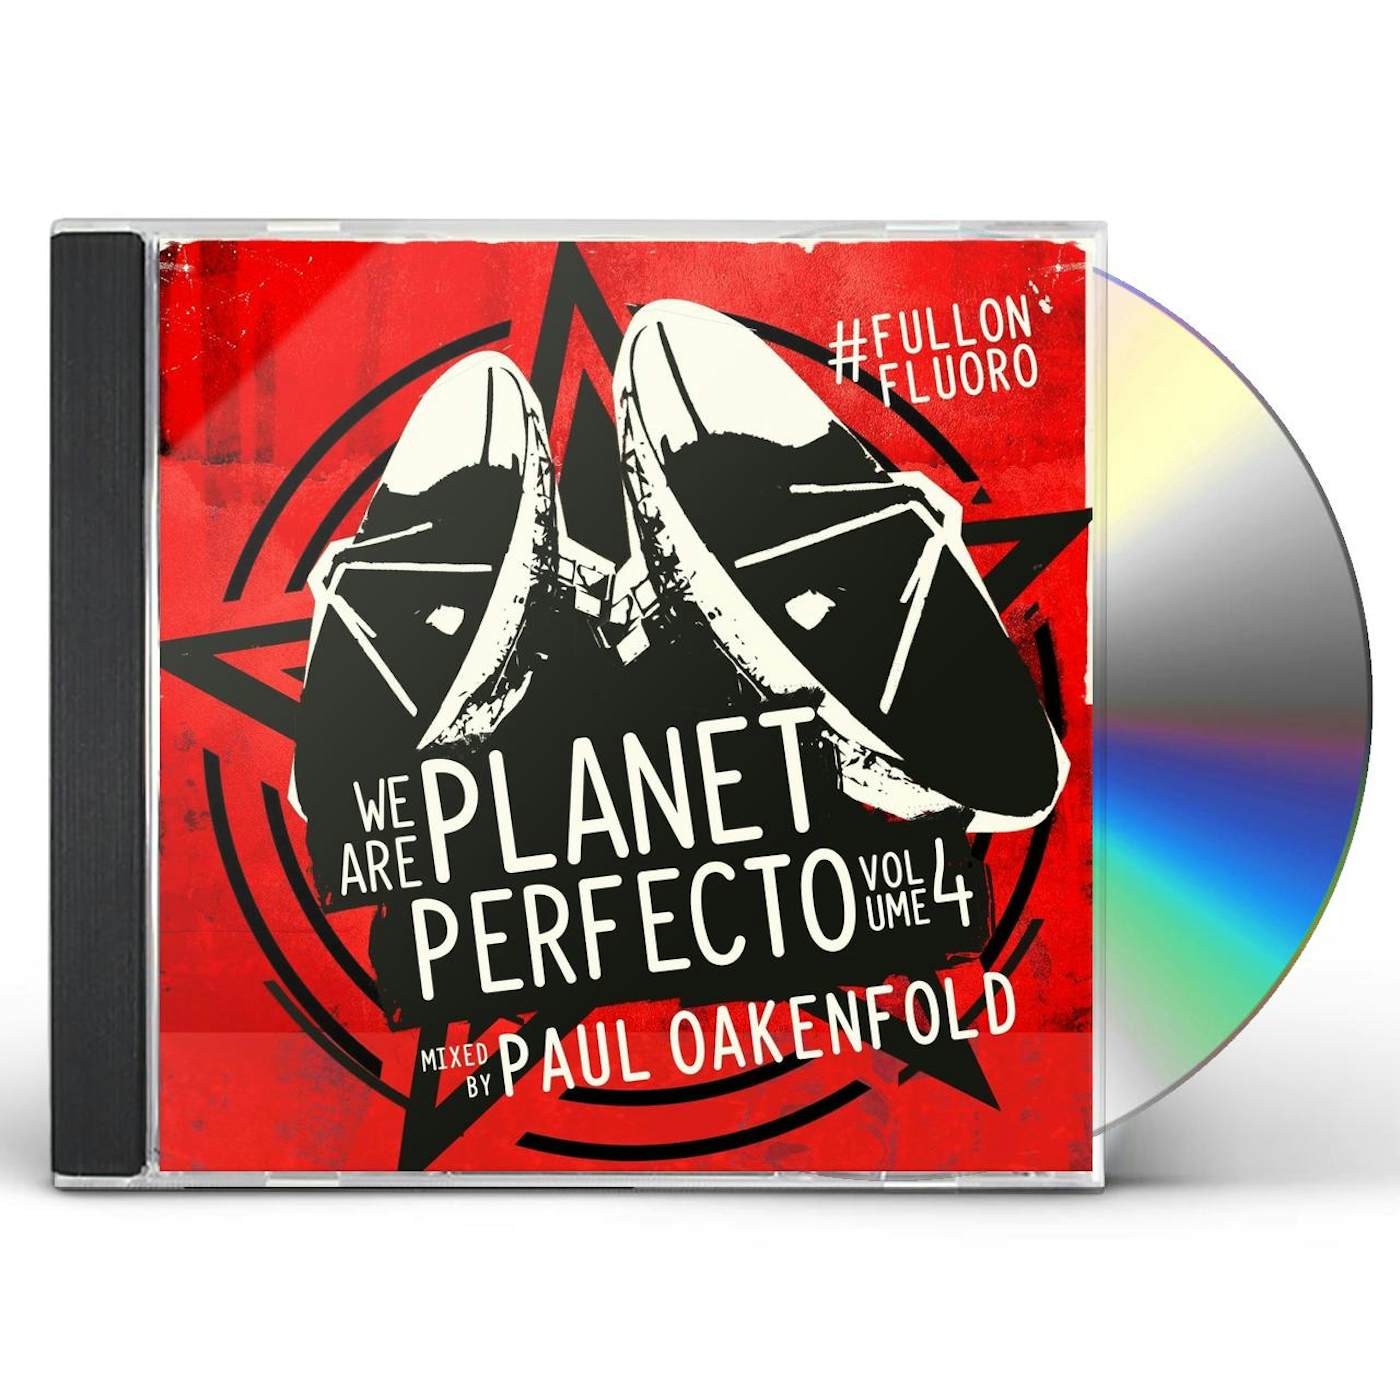 Paul Oakenfold WE ARE PLANET PERFECTO 4 CD